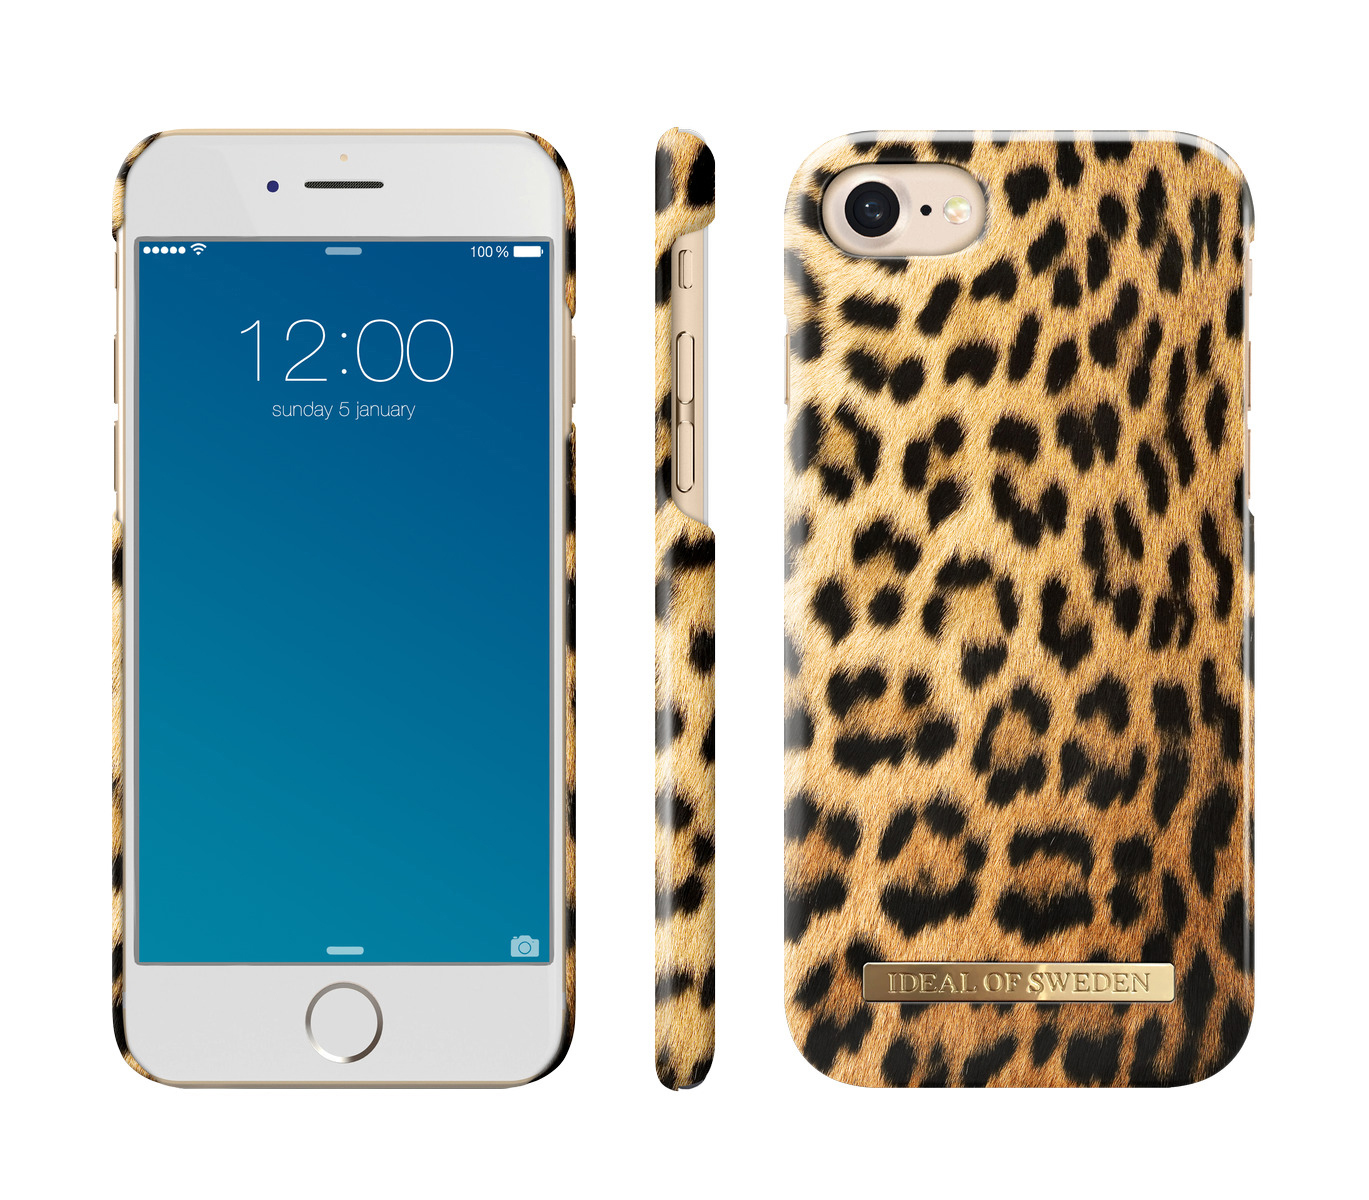 Fashion, 8, Apple, Backcover, Leopard SWEDEN Wild iPhone iPhone IDEAL OF 6, iPhone 7,